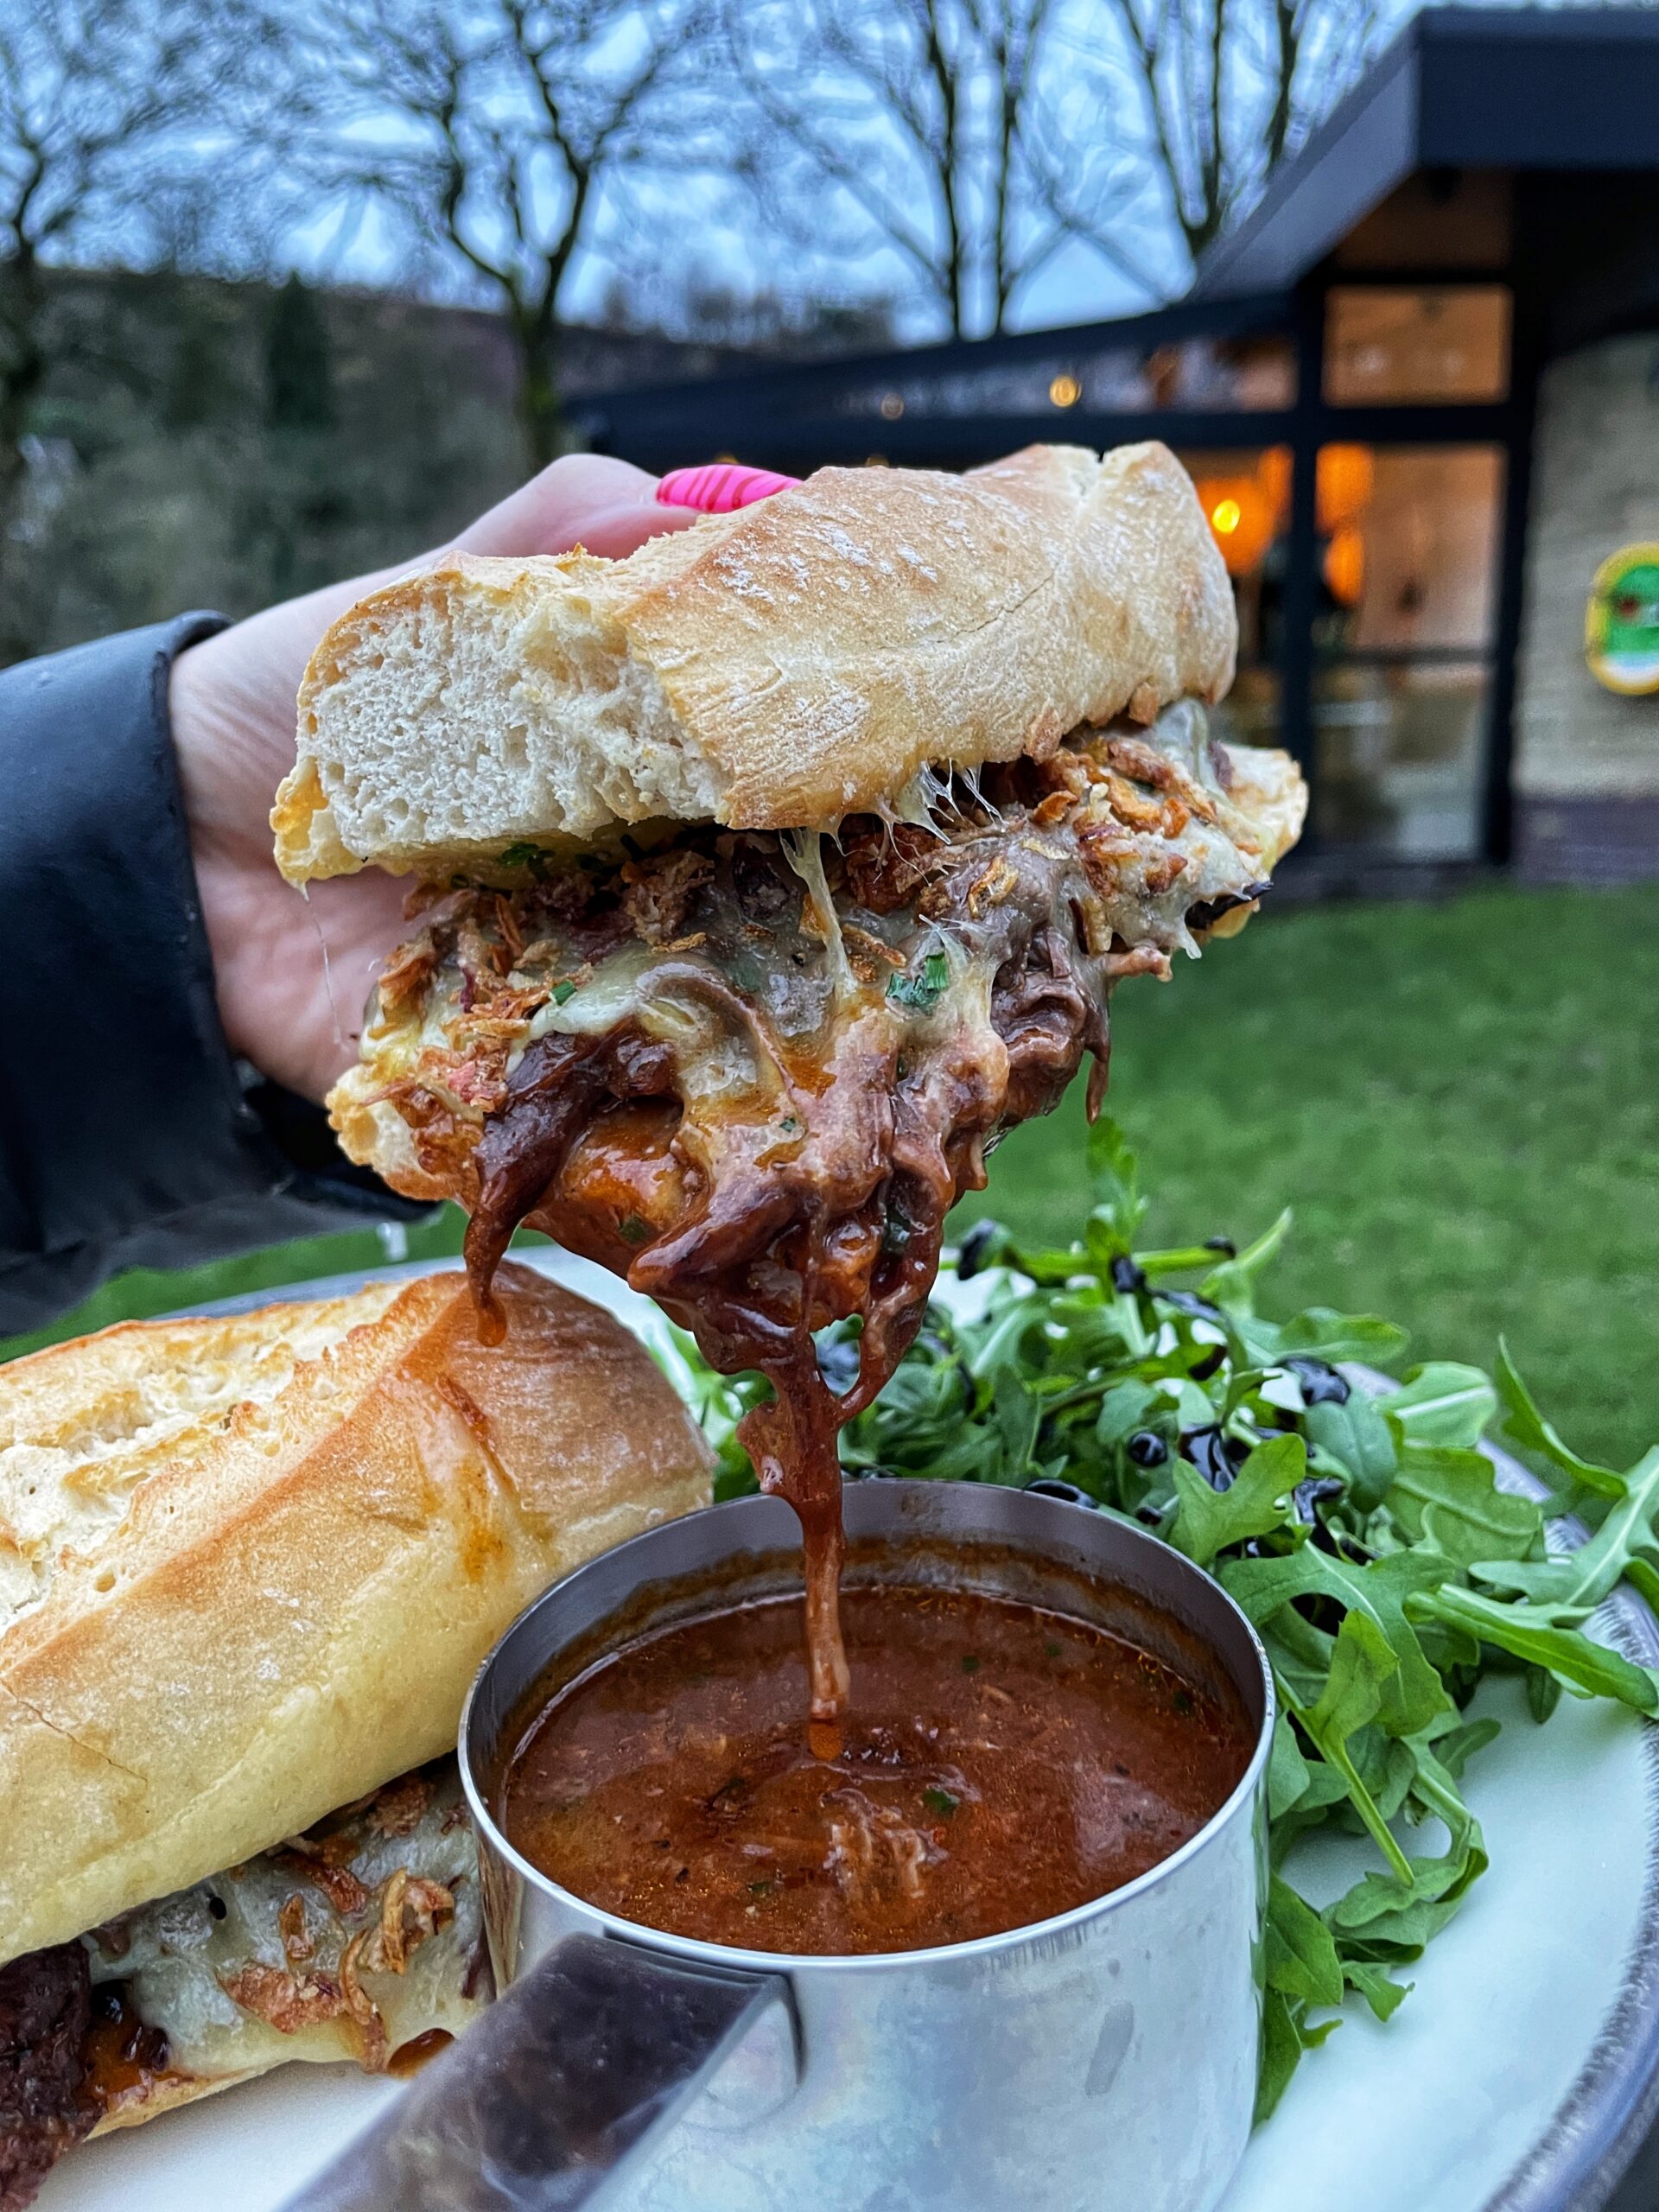 The beef brisket baguette at Greene's Bistro in Uppermill. Credit: The Manc Group